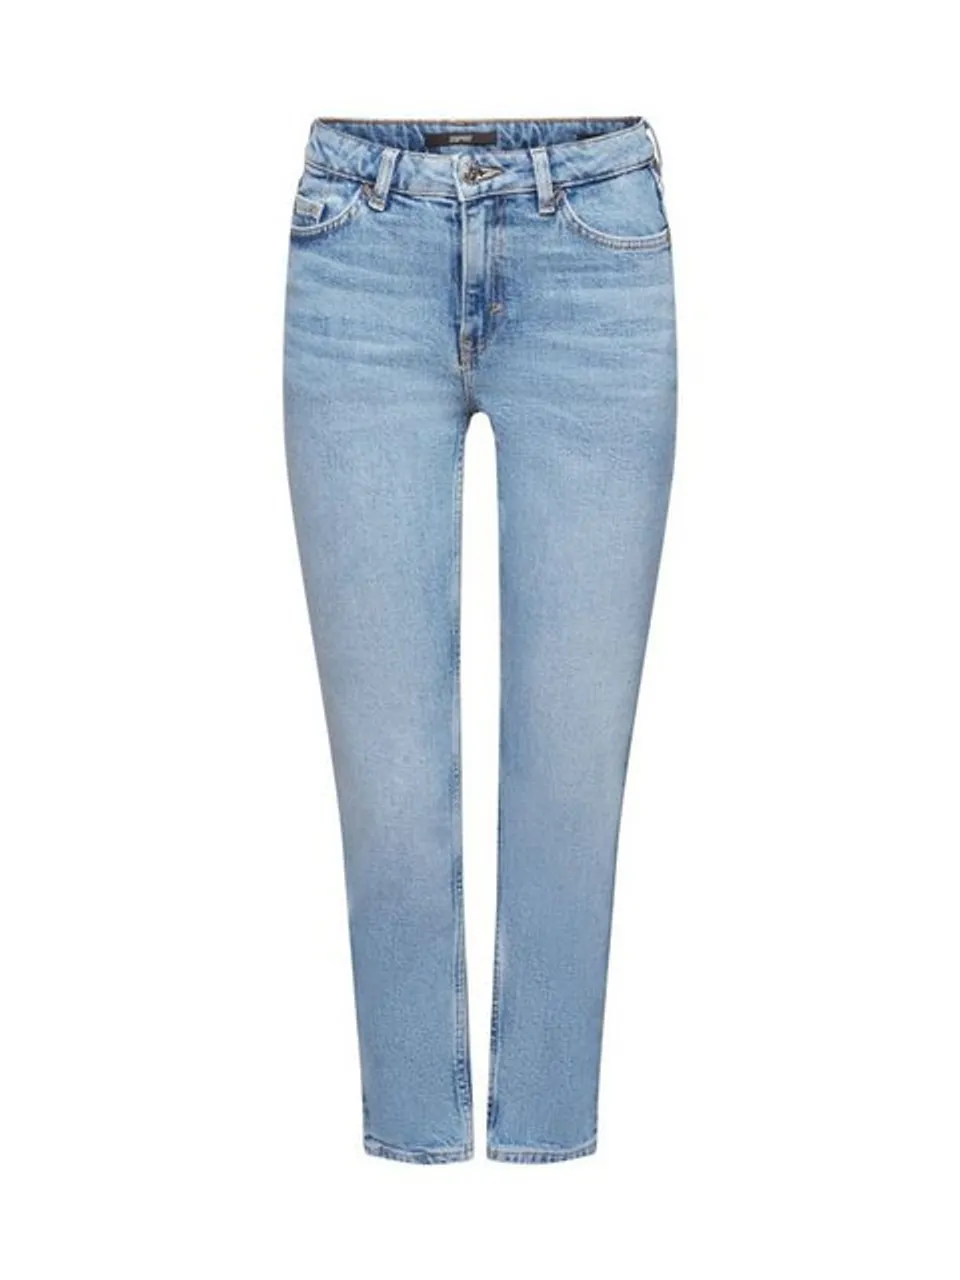 Esprit Collection 7/8-Jeans Kick Flare Jeans, High-Rise